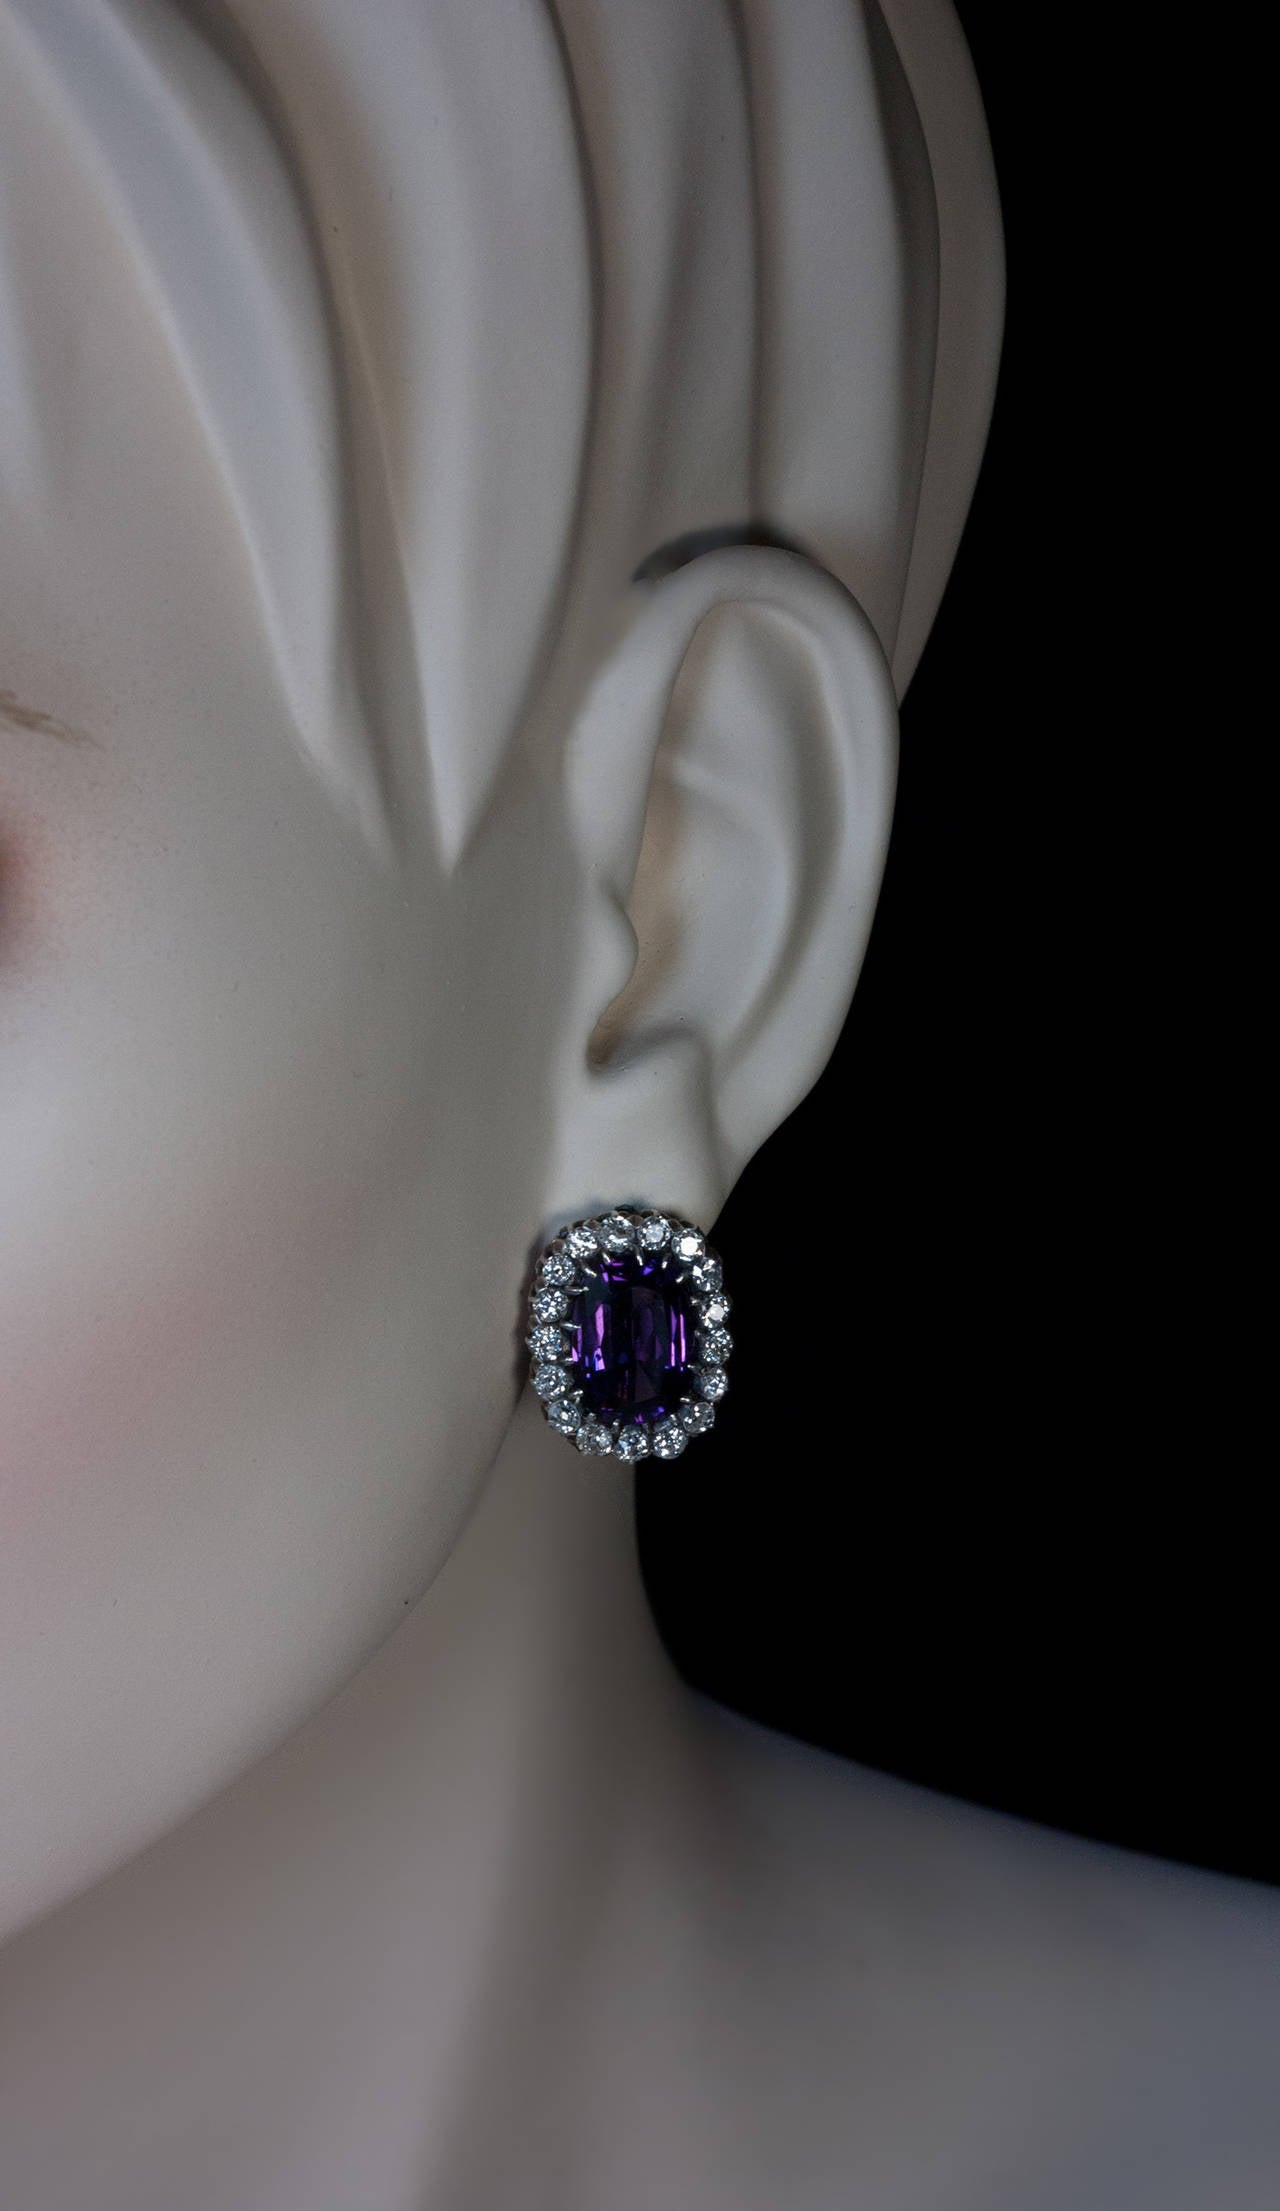 Made in Odessa between 1908 and 1917

The silver topped 14K gold earrings are set with two large cushion cut amethysts:

Approximately 5.40 ct each / 10.80 ct total weight,

Surrounded by sparkling bright white old cut diamonds (estimated